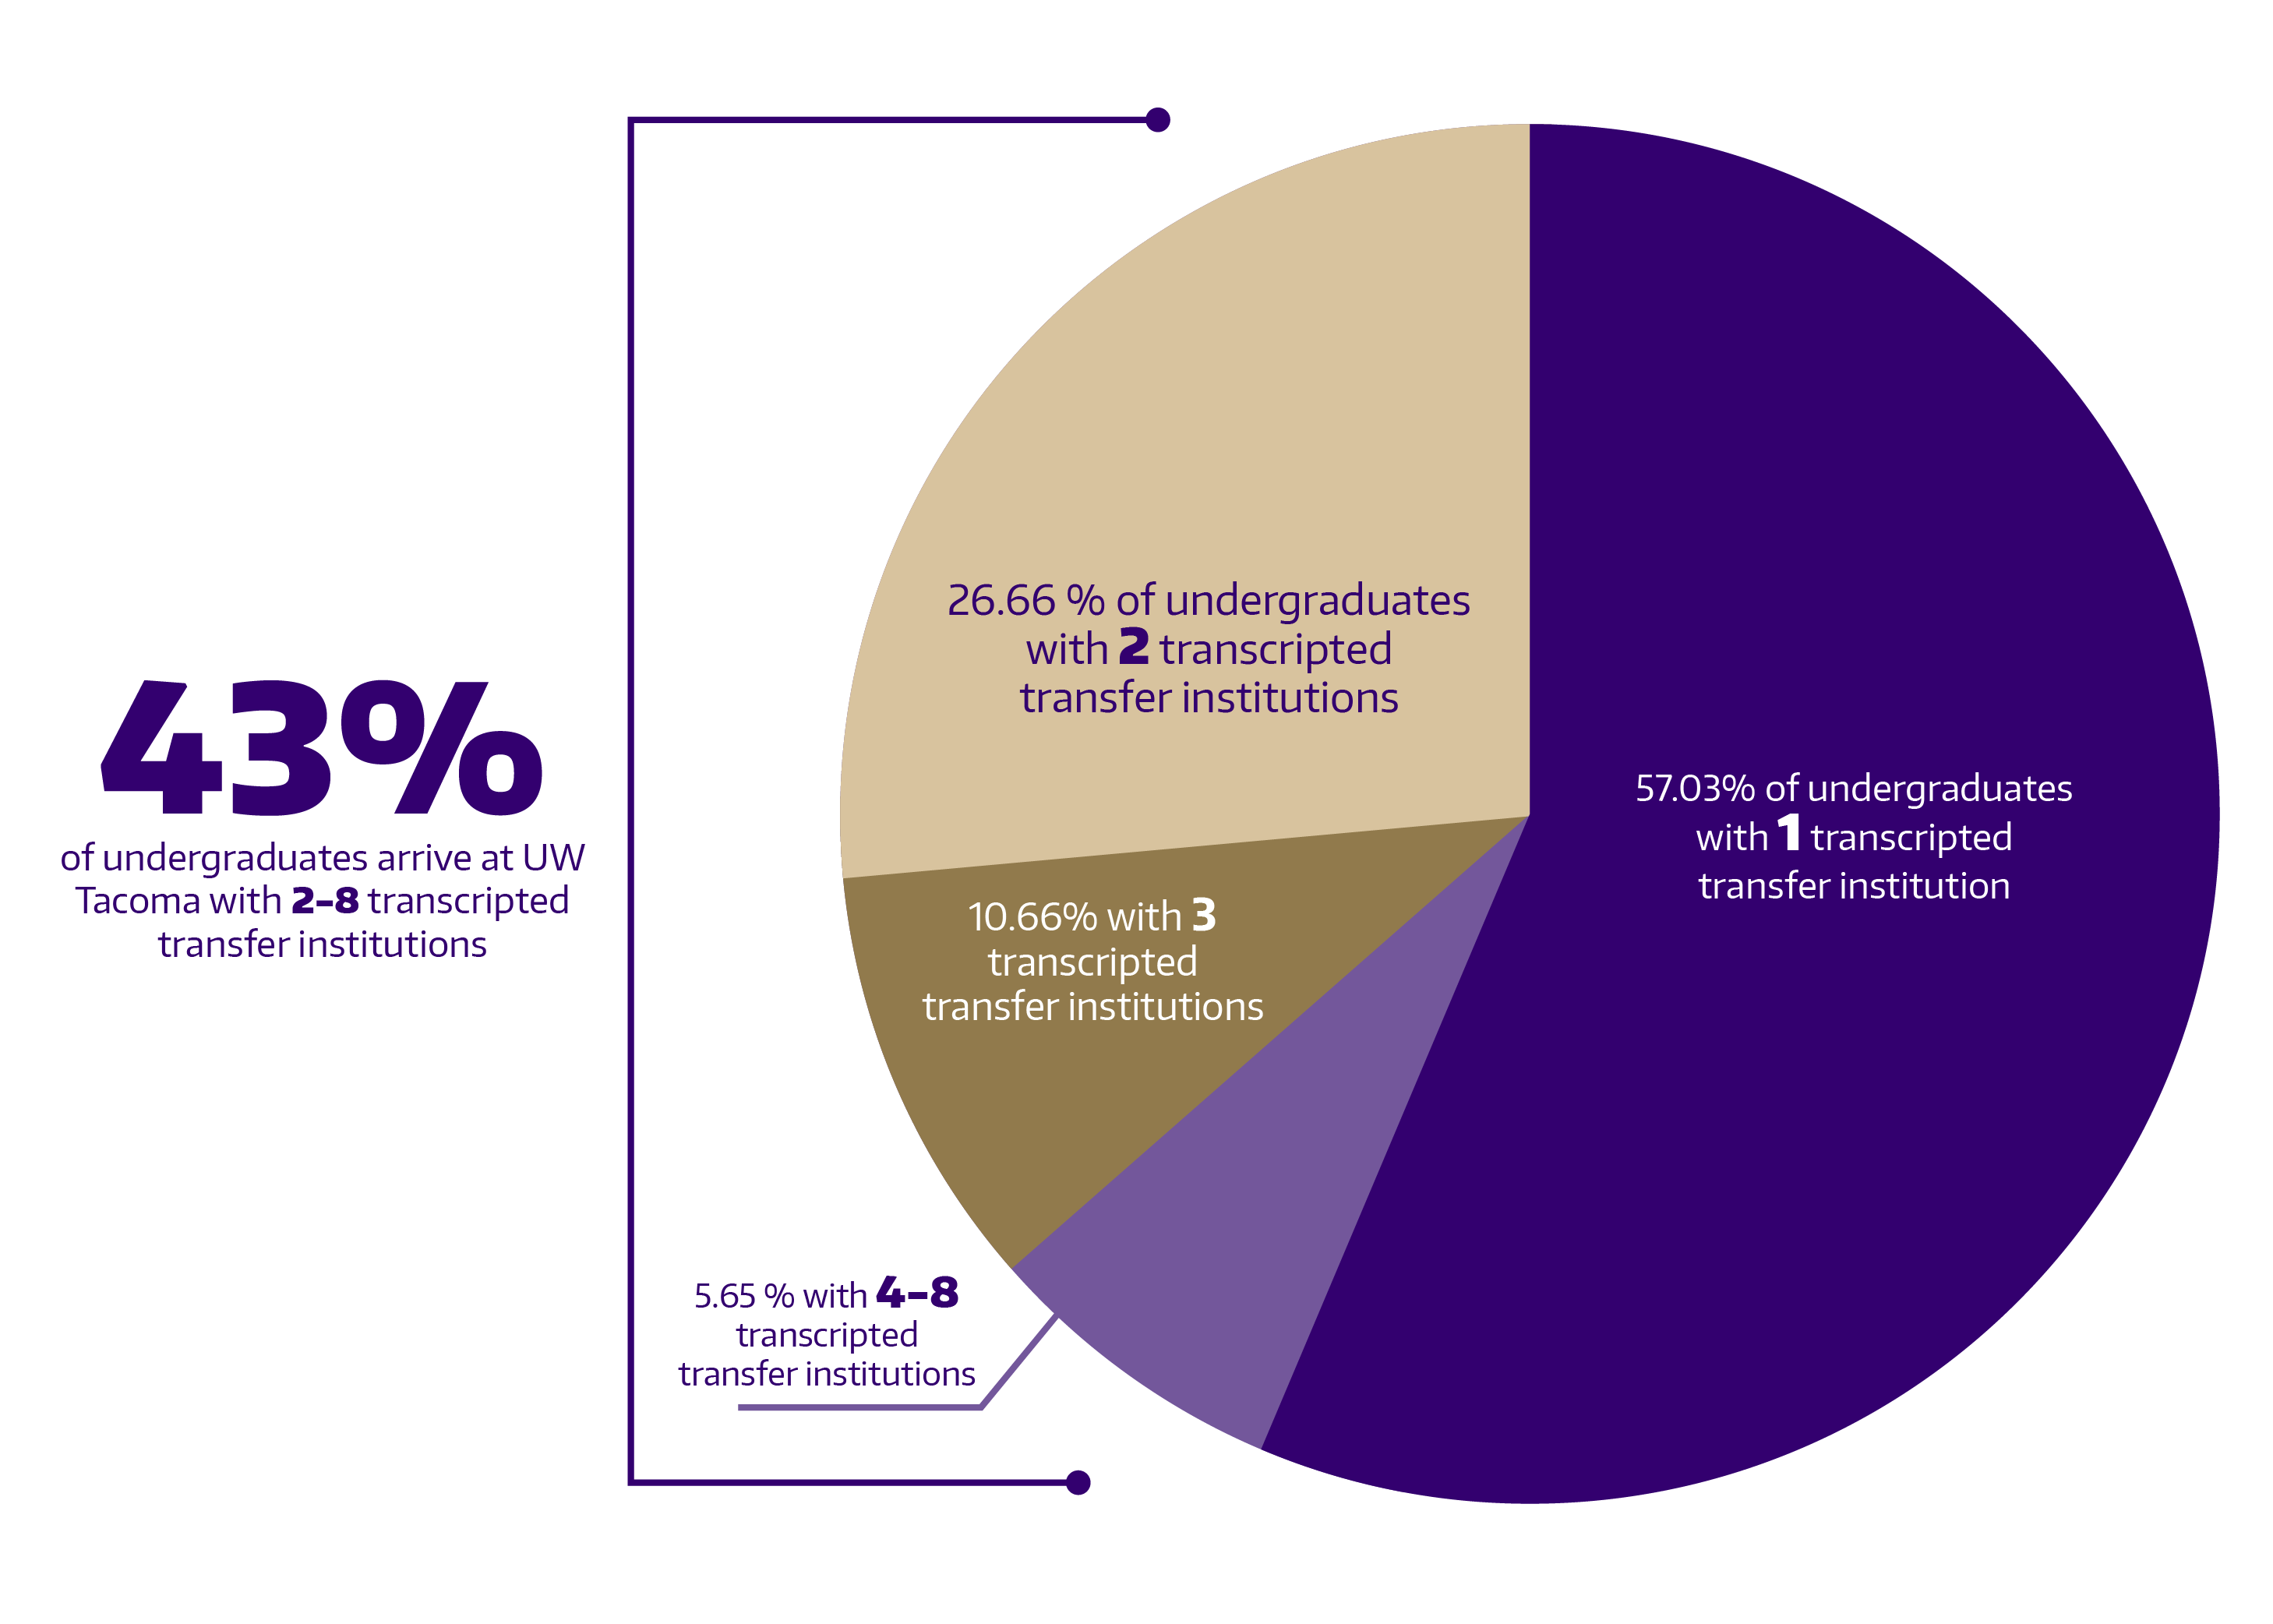 A pie chart depicting the percentage of UW Tacoma students who transfer to campus from different universities. Data from 2022 shows that 43% of students came to campus with 2-8 transcripted transfer institutions. 